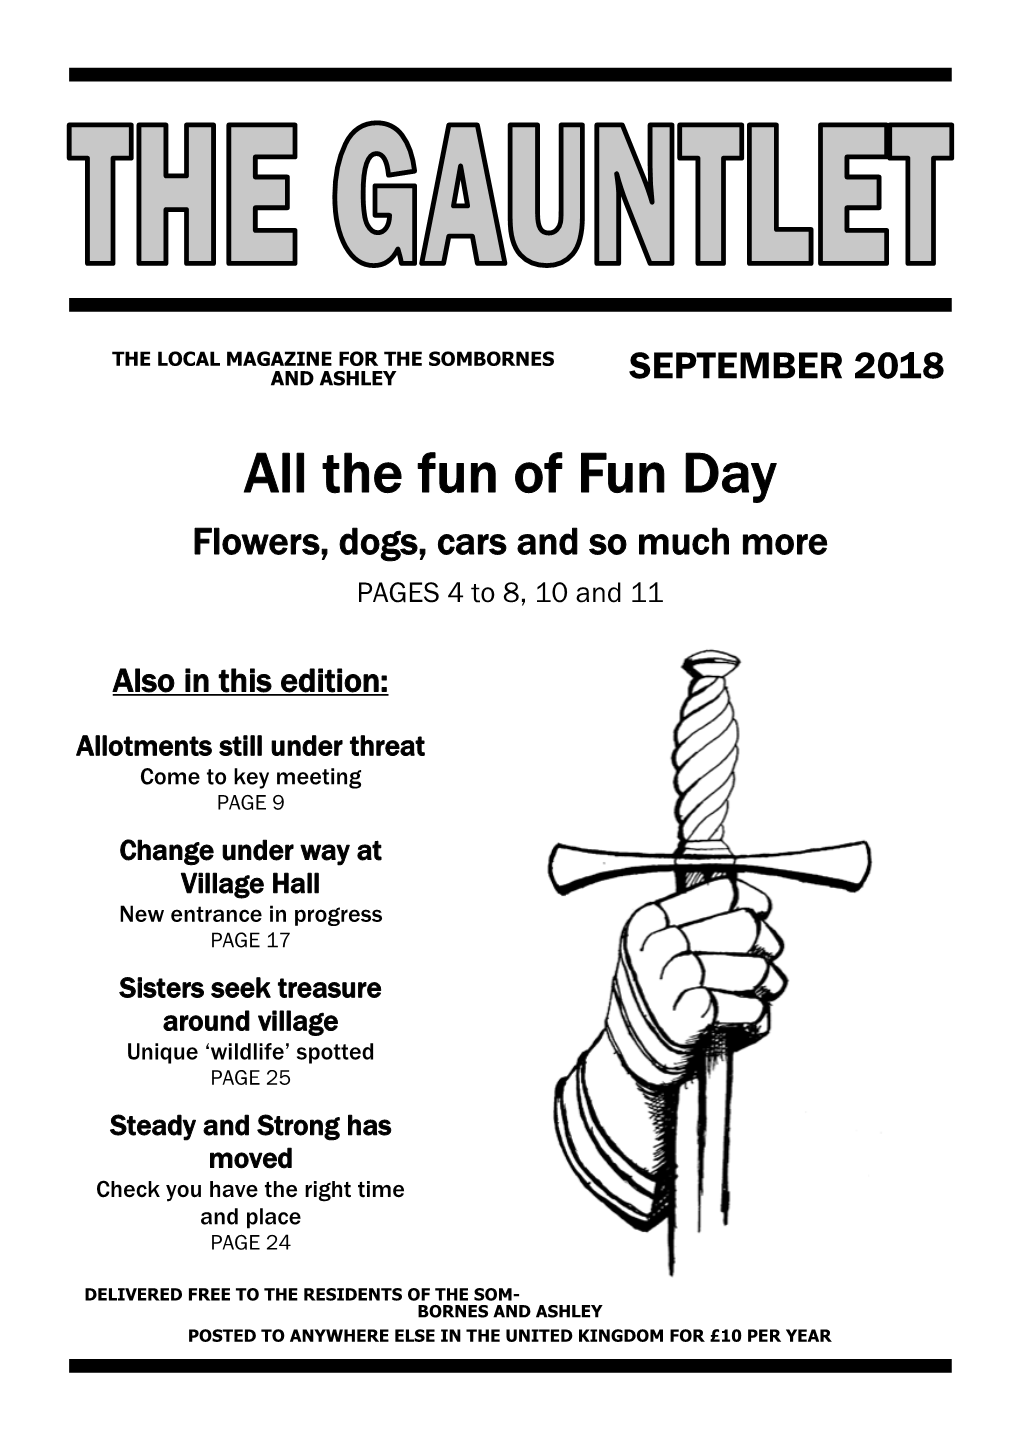 All the Fun of Fun Day Flowers, Dogs, Cars and So Much More PAGES 4 to 8, 10 and 11